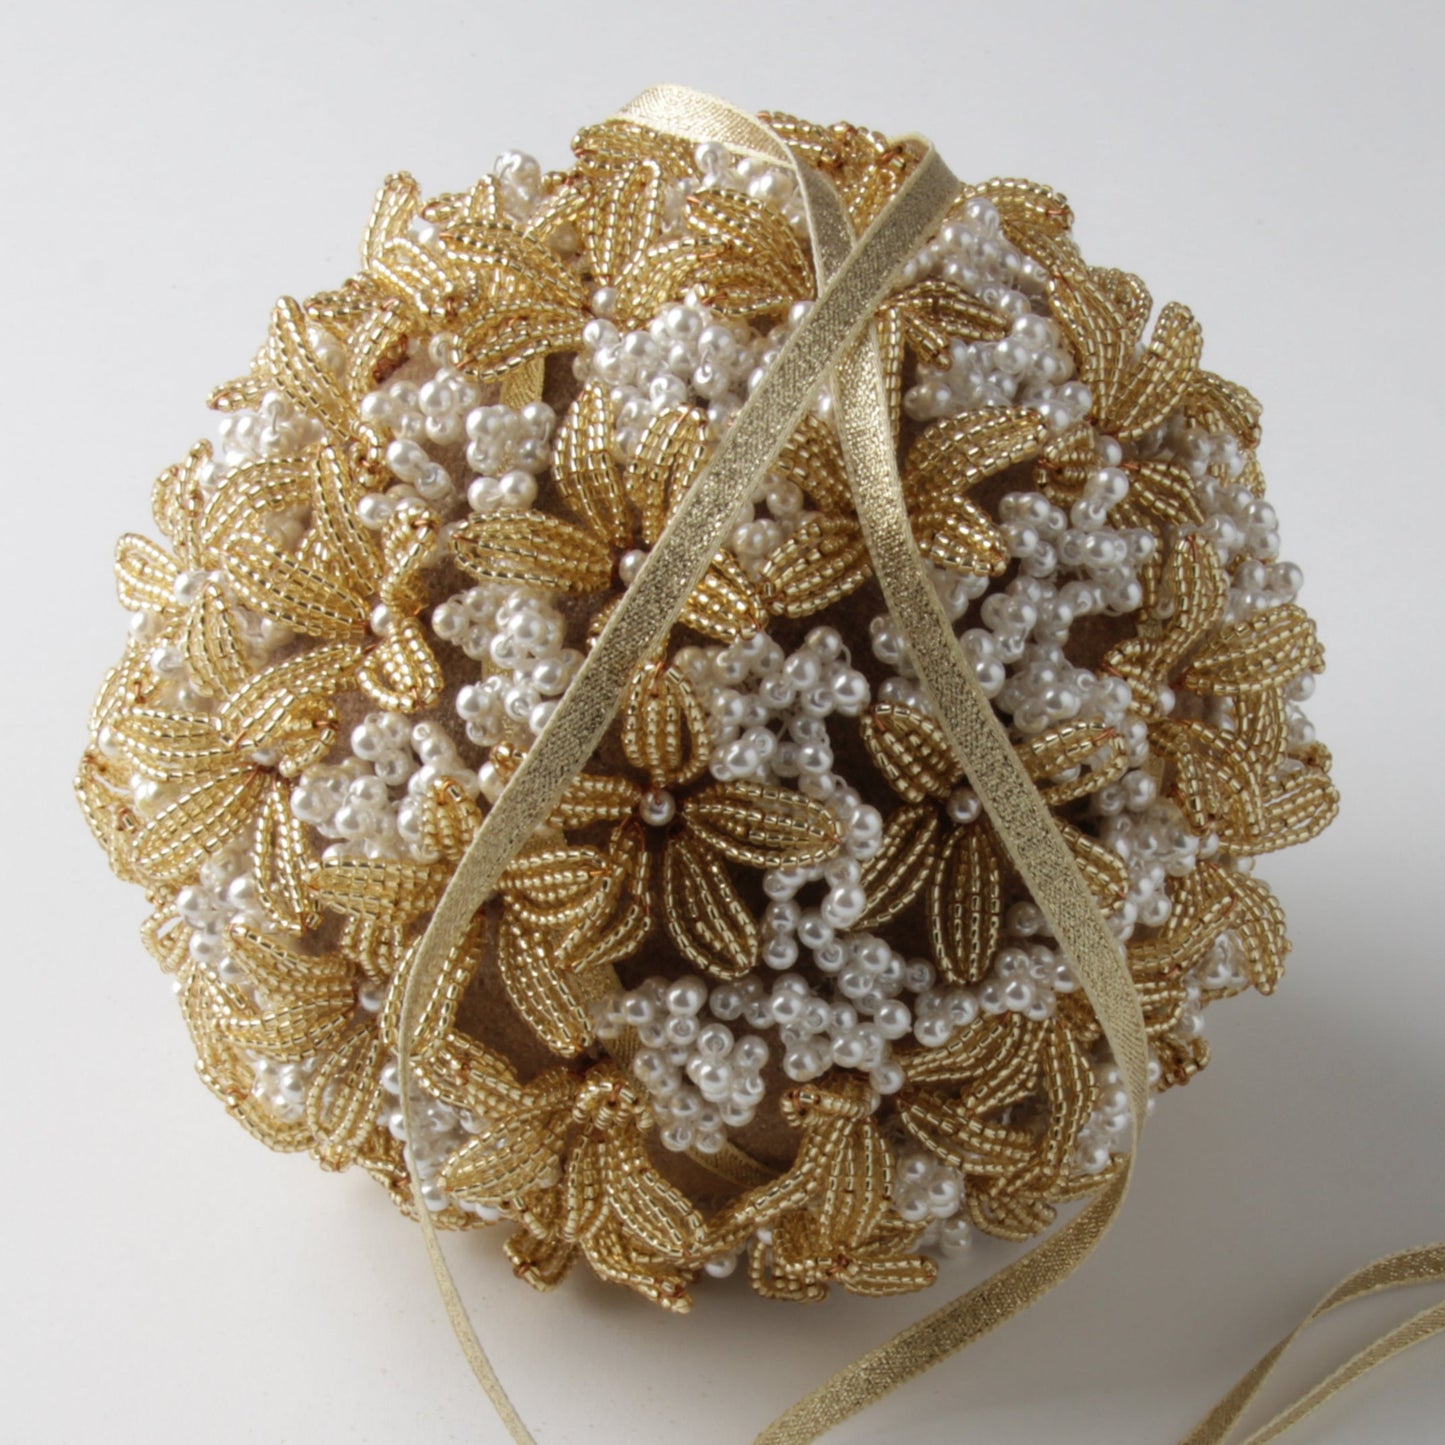 Bead Flowers for Weddings: Complete Guide to French Beaded Flowers, by Katie Dean